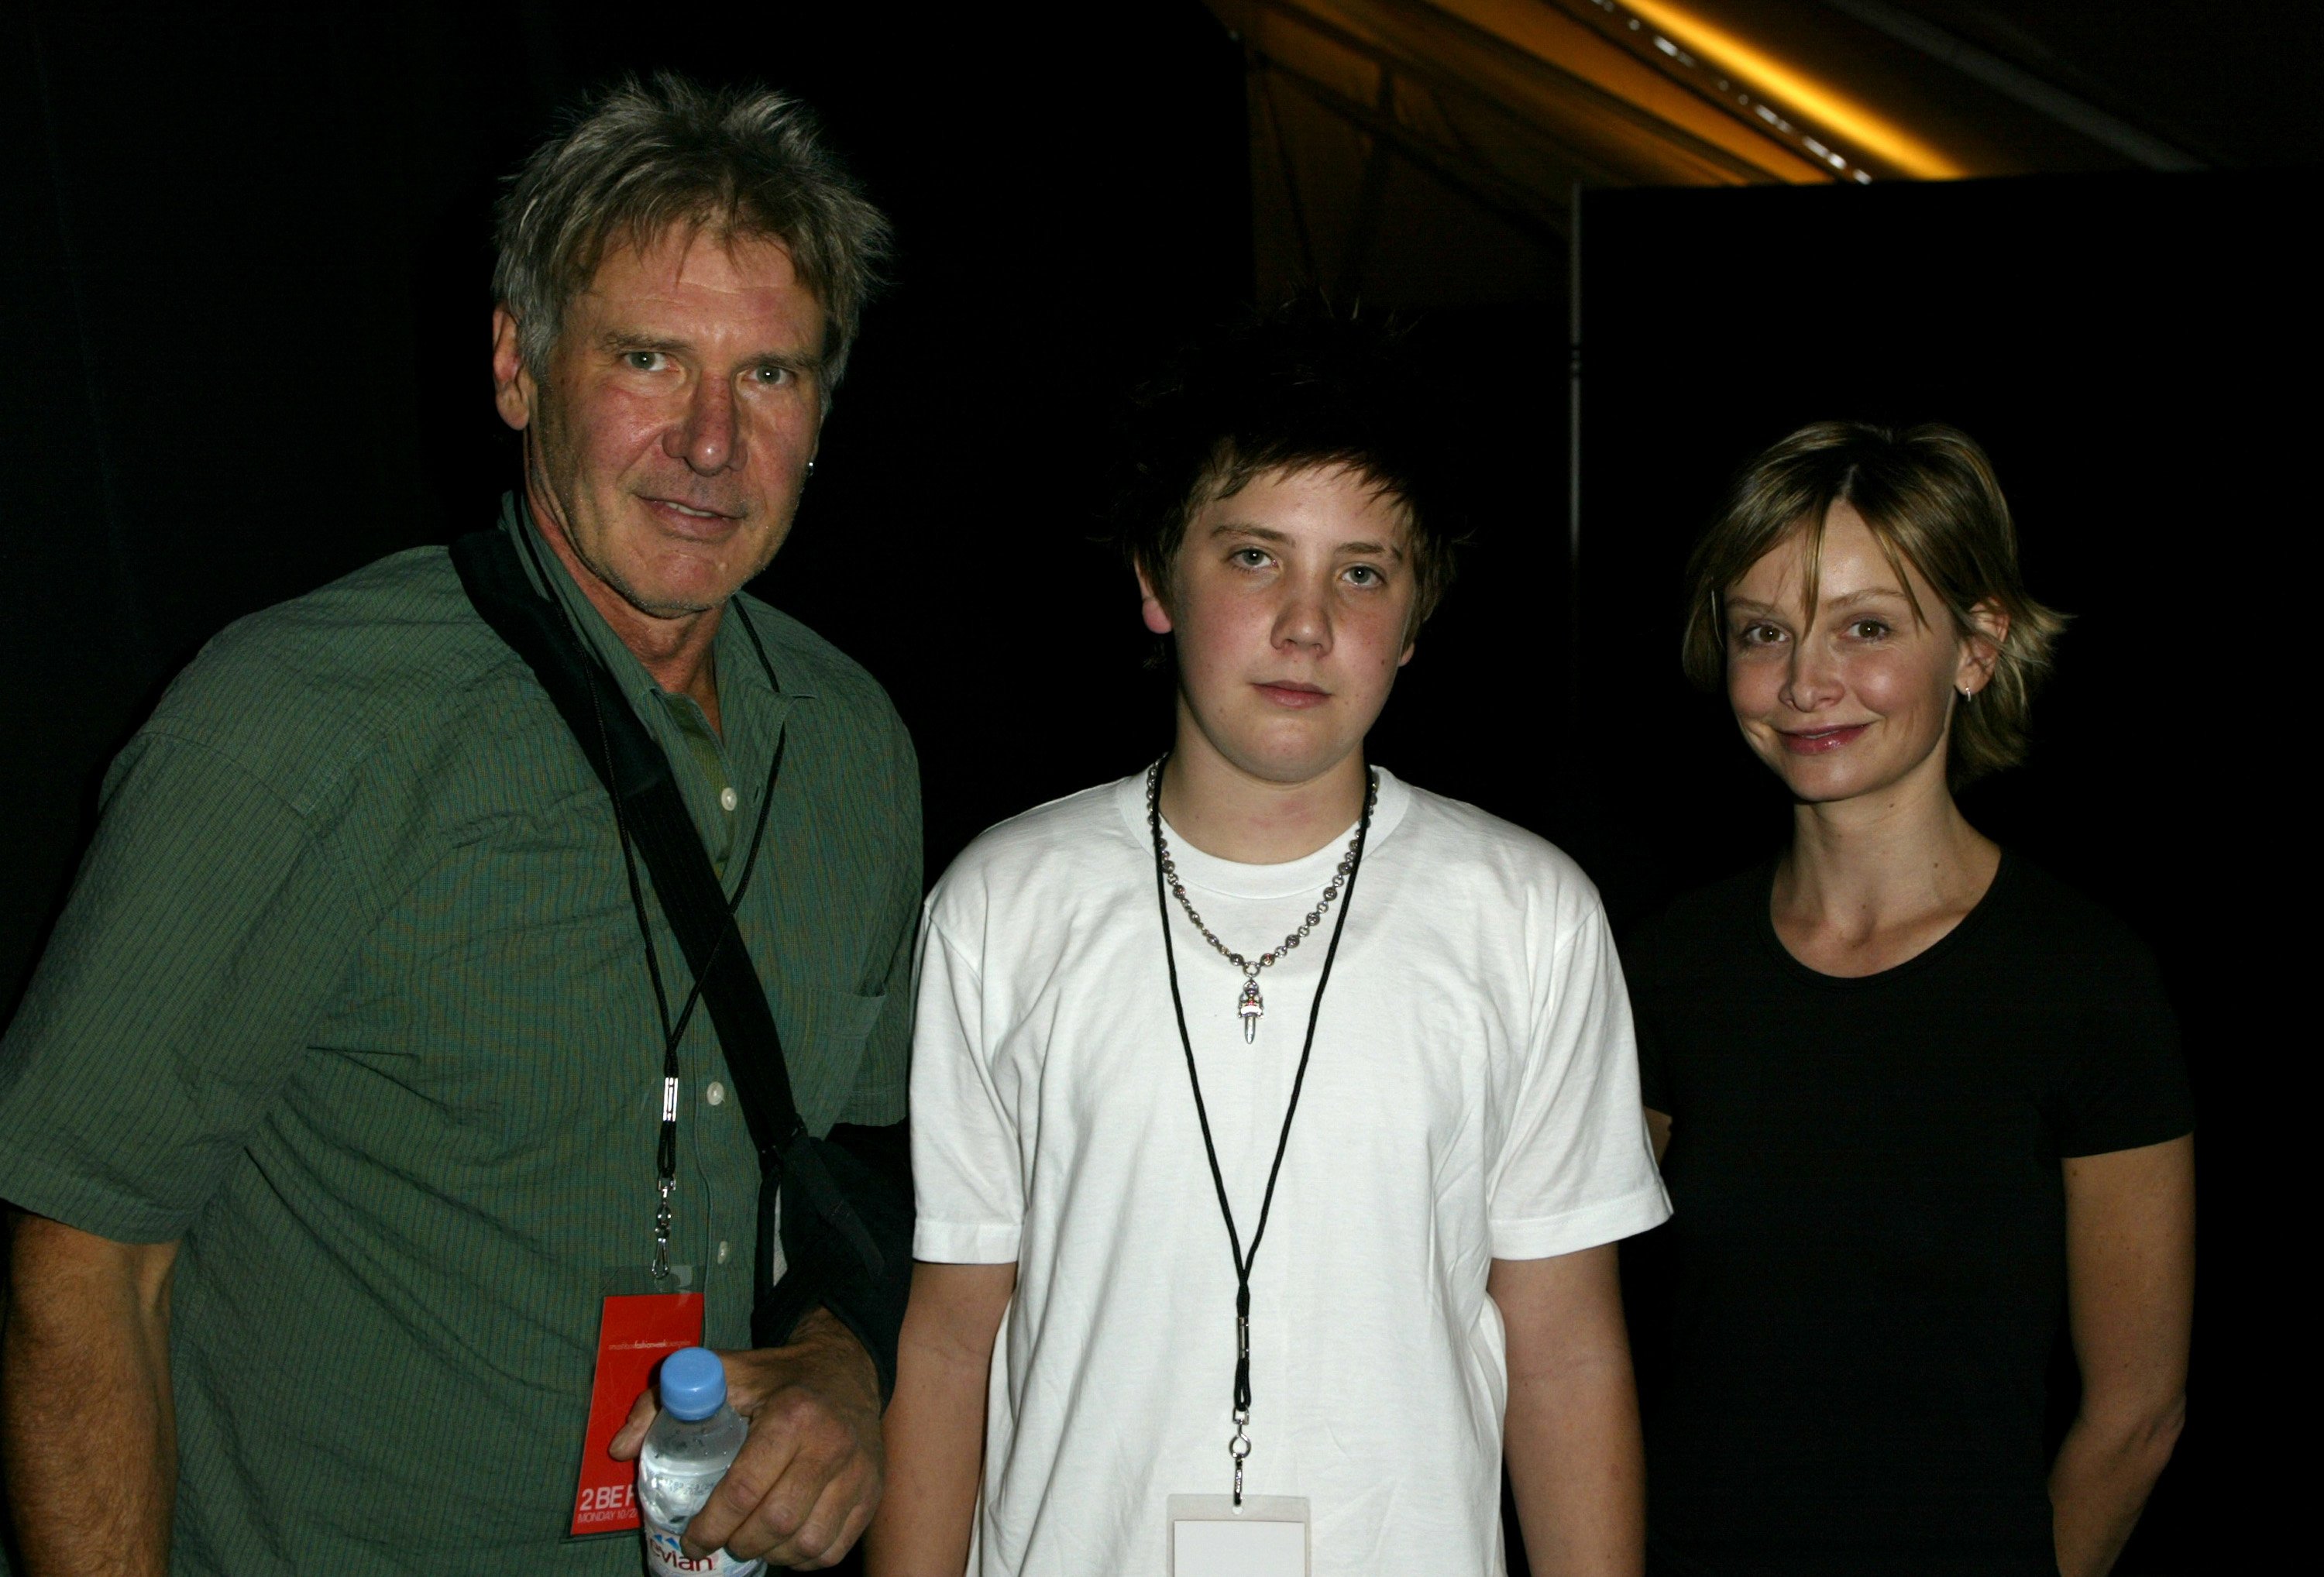 Harrison Ford, Malcolm Ford, and Calista Flockhart at Smashbox LA Fashion Week Spring in Culver City, California, on October 27, 2003 | Source: Getty Images